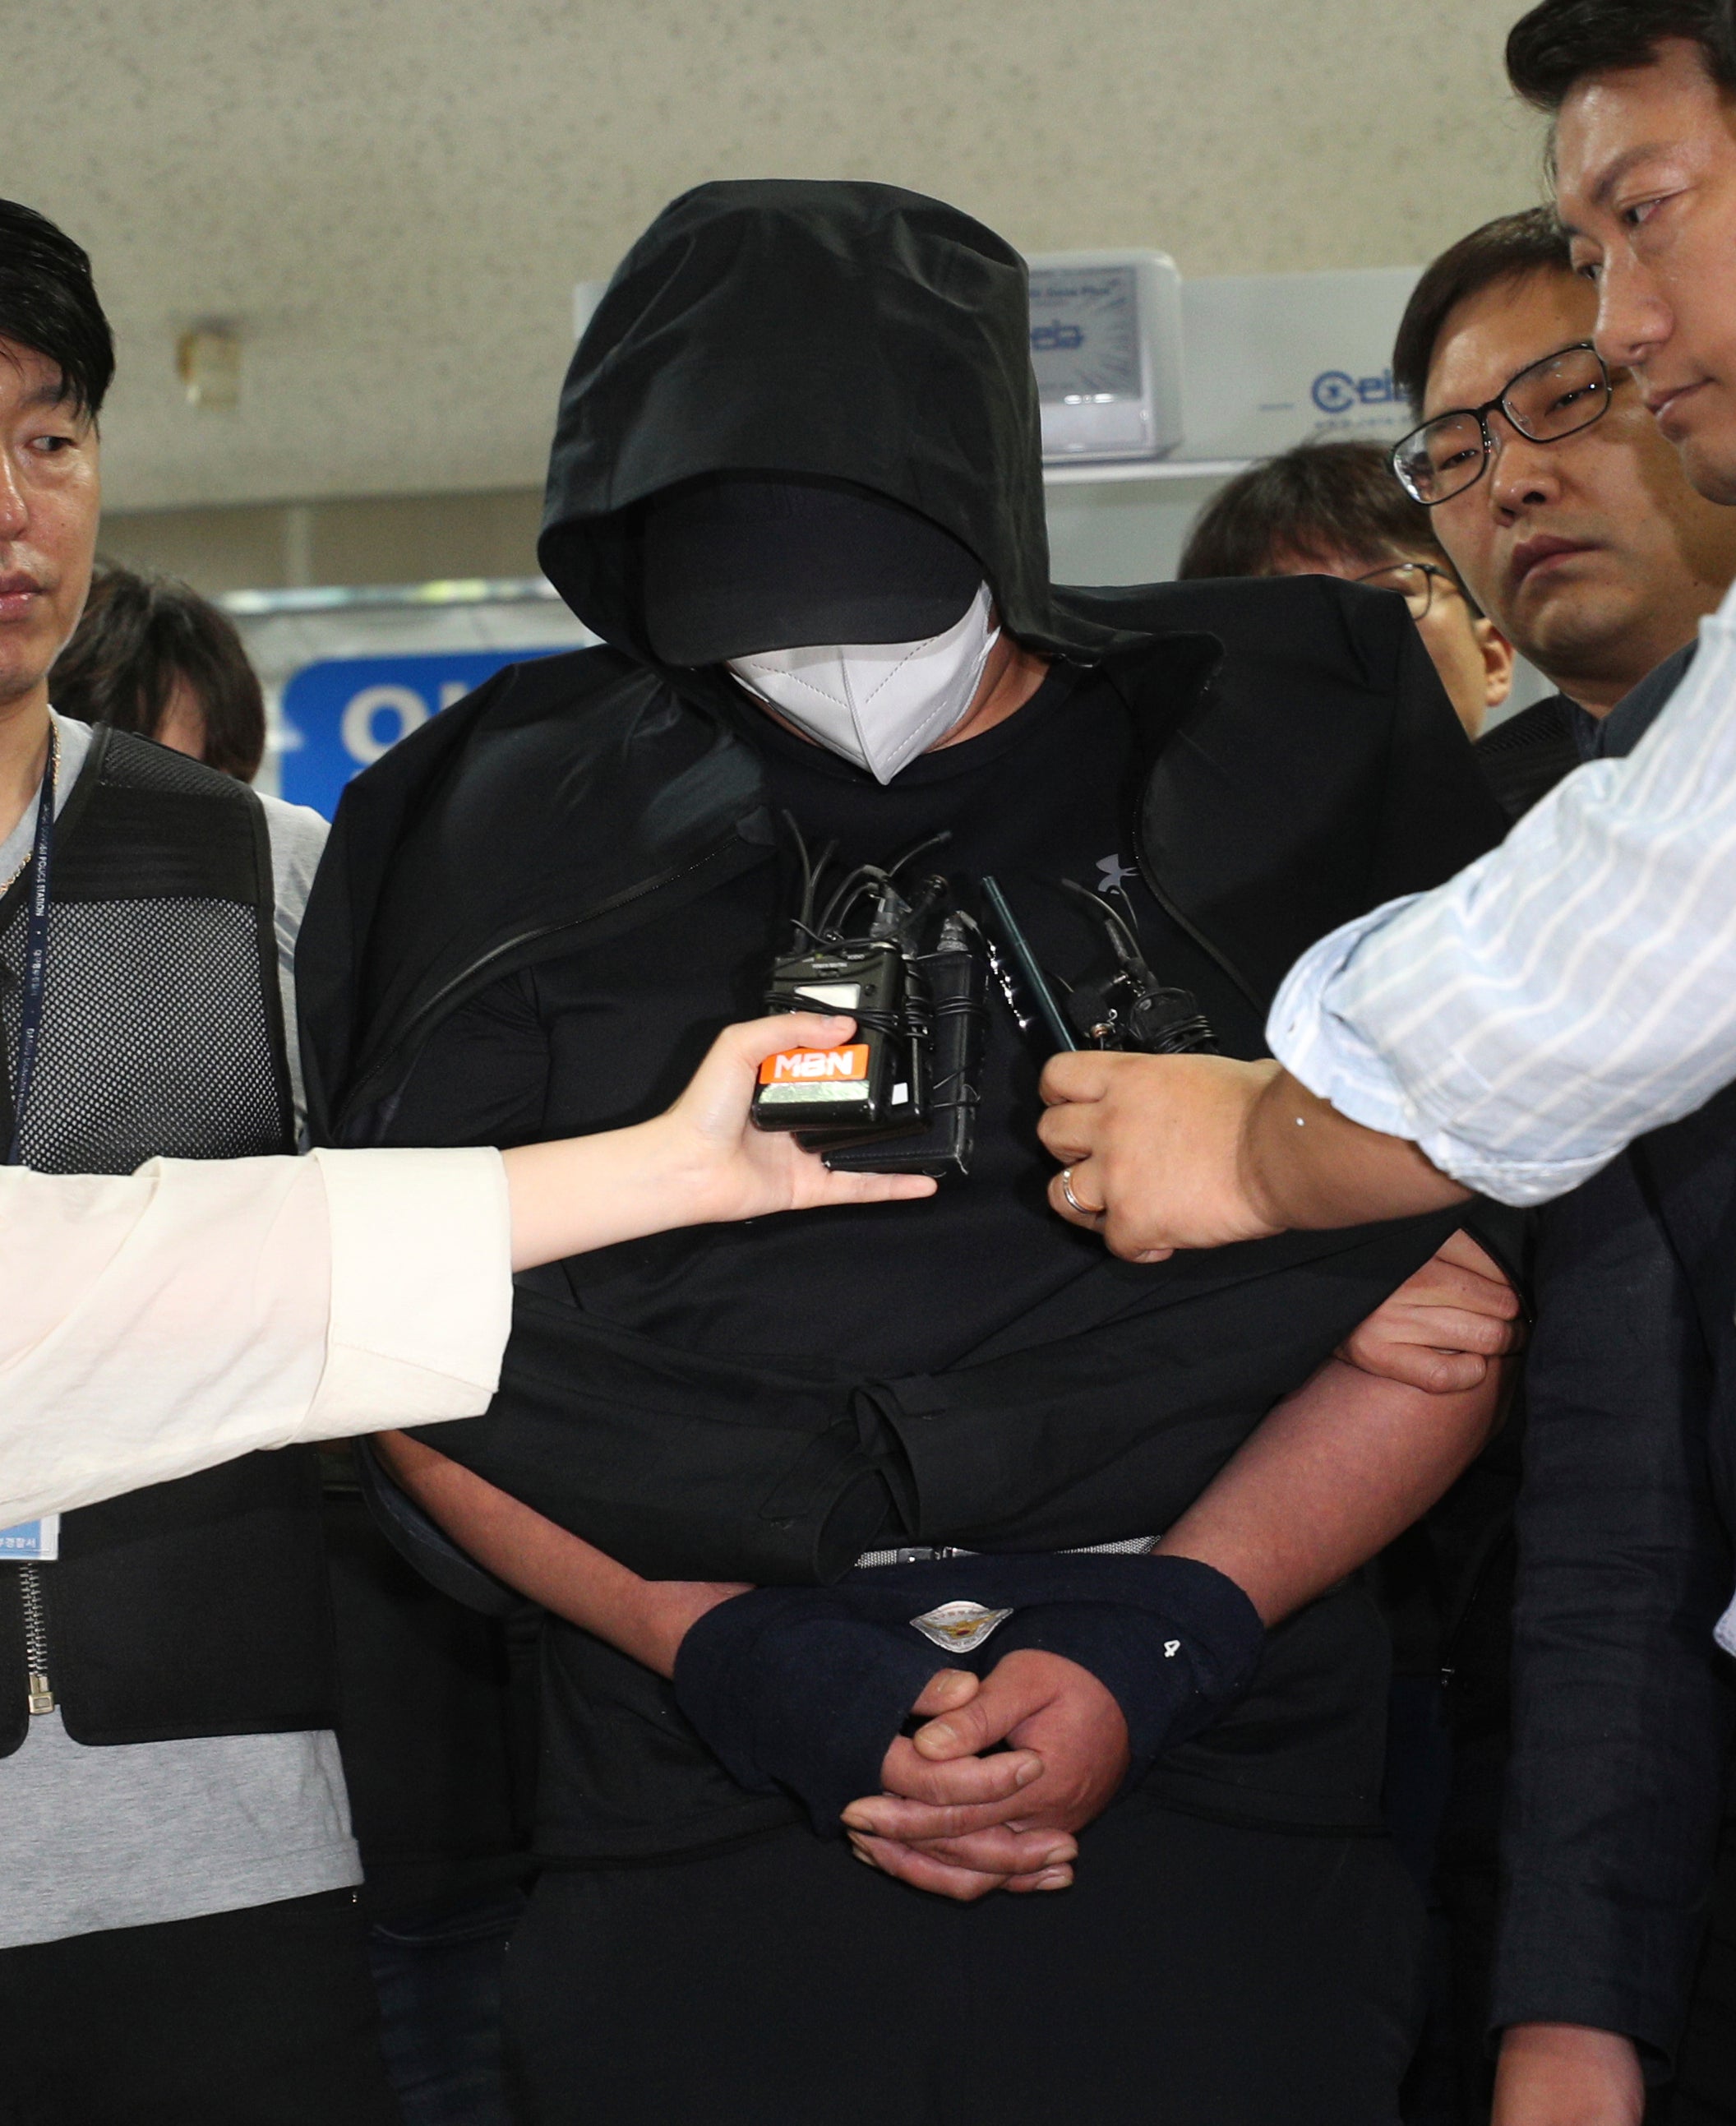 The accused of opening the emergency exit door arrives to attend an arrest warrant review at Daegu District Court